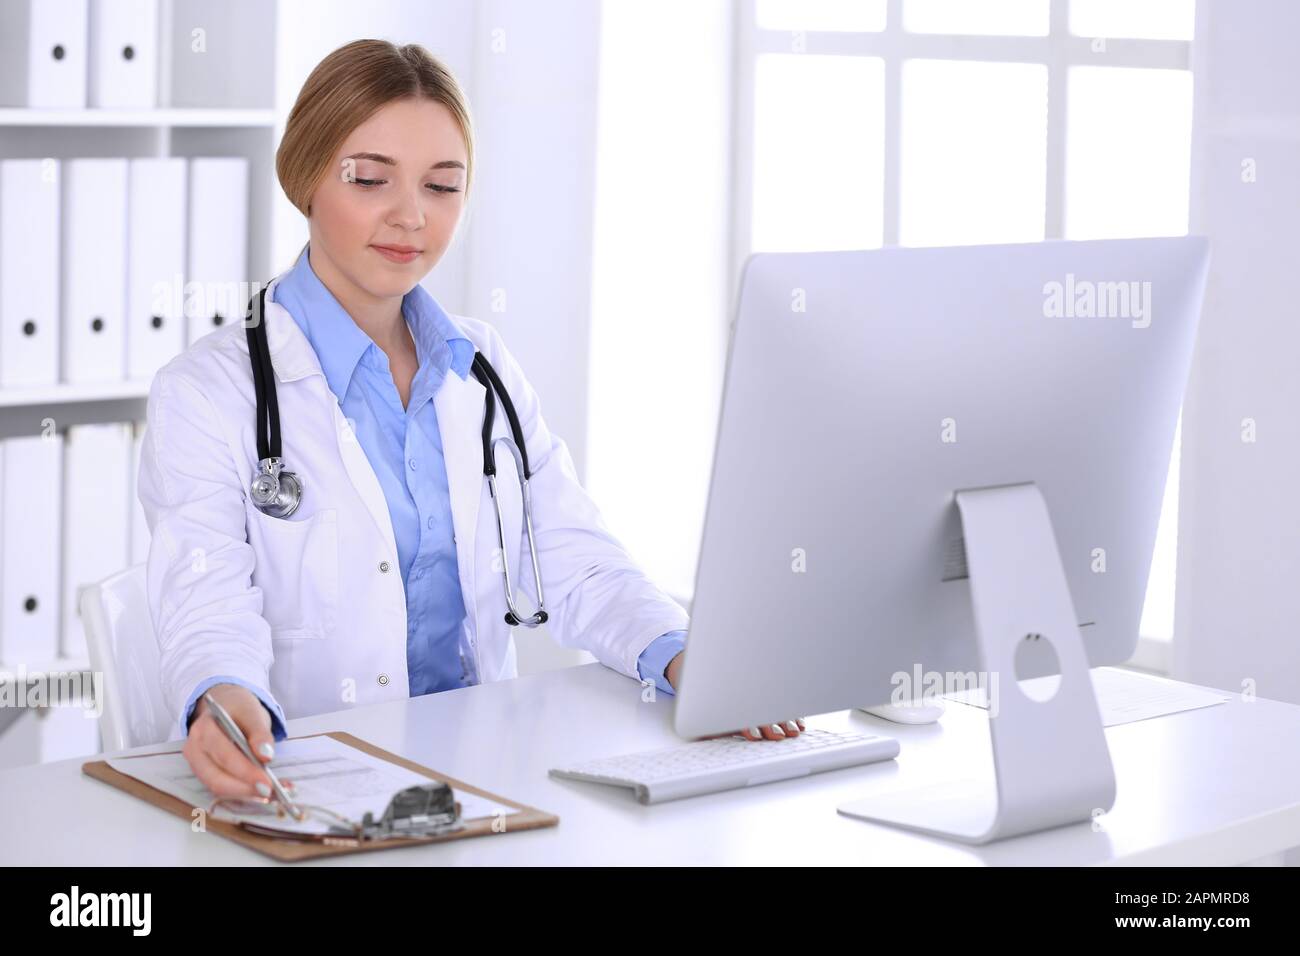 Young woman doctor at work in hospital looking at desktop pc monitor. Physician controls medication history records and exam results. Medicine and Stock Photo